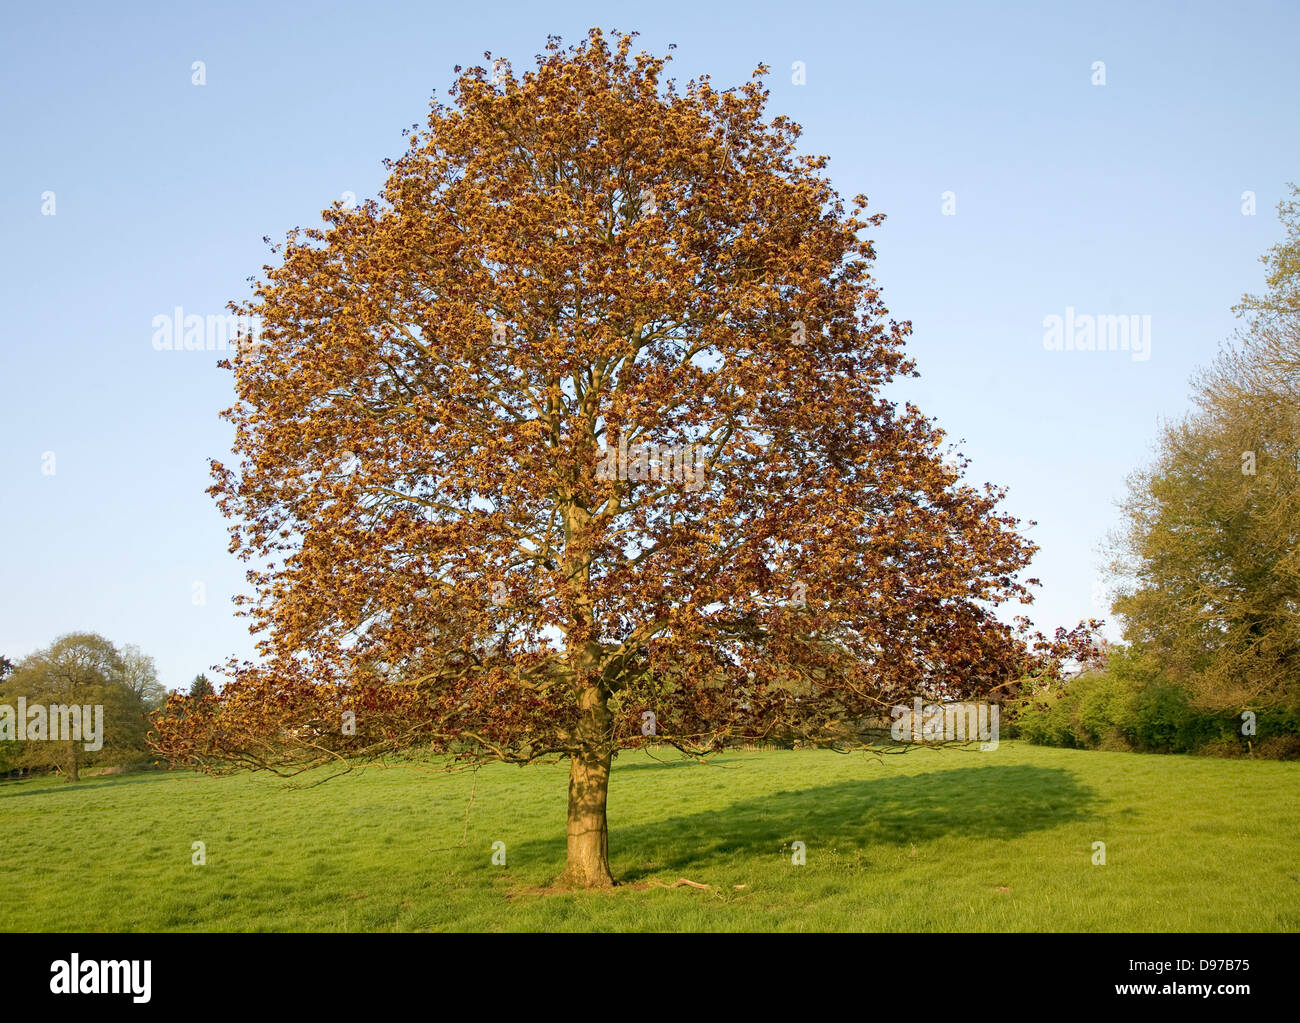 Norway Maple Tree Acer Platanoides In Spring Blossom And Leaf Suffolk England Stock Photo Alamy